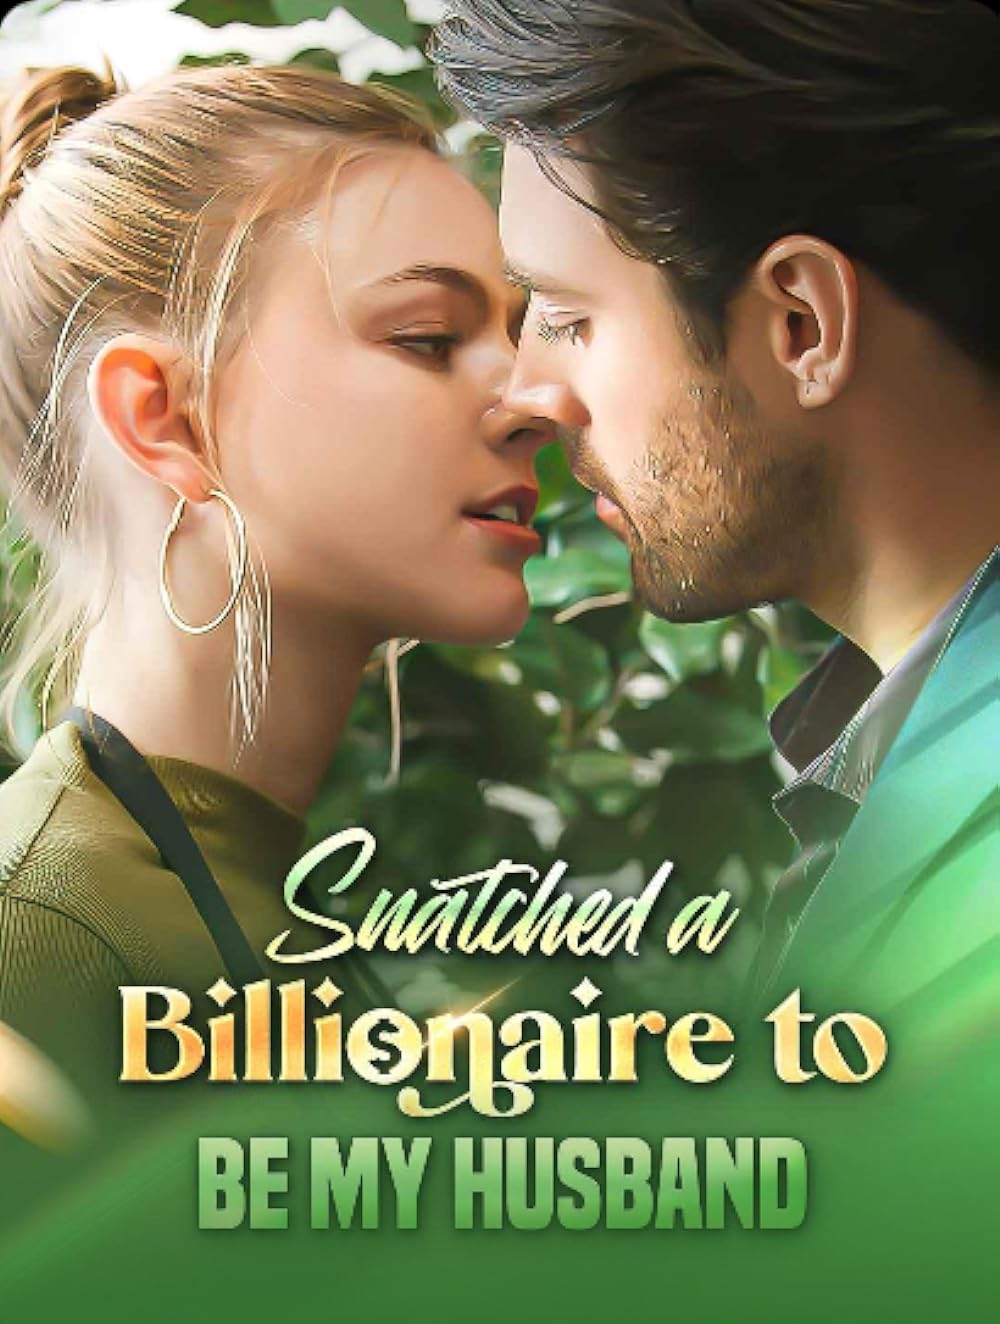 Snatched a Billionaire to be My Husband - Full Episodes for Free (Part 2)